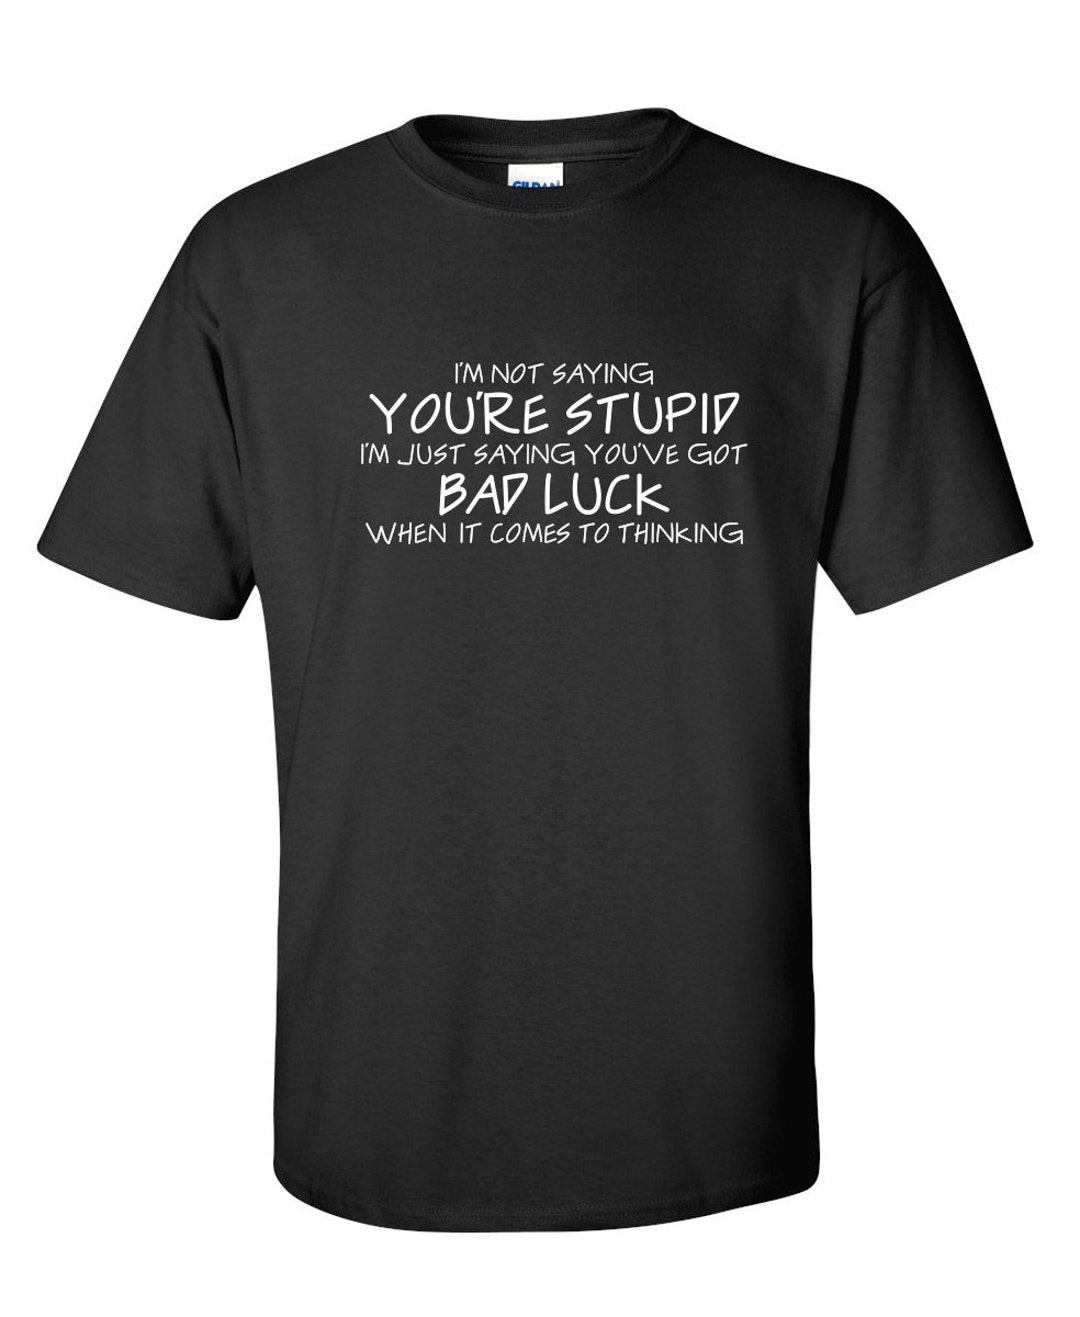 I'm Not Saying Your Stupid Funny T-shirt PS_0433W Novelty - Etsy